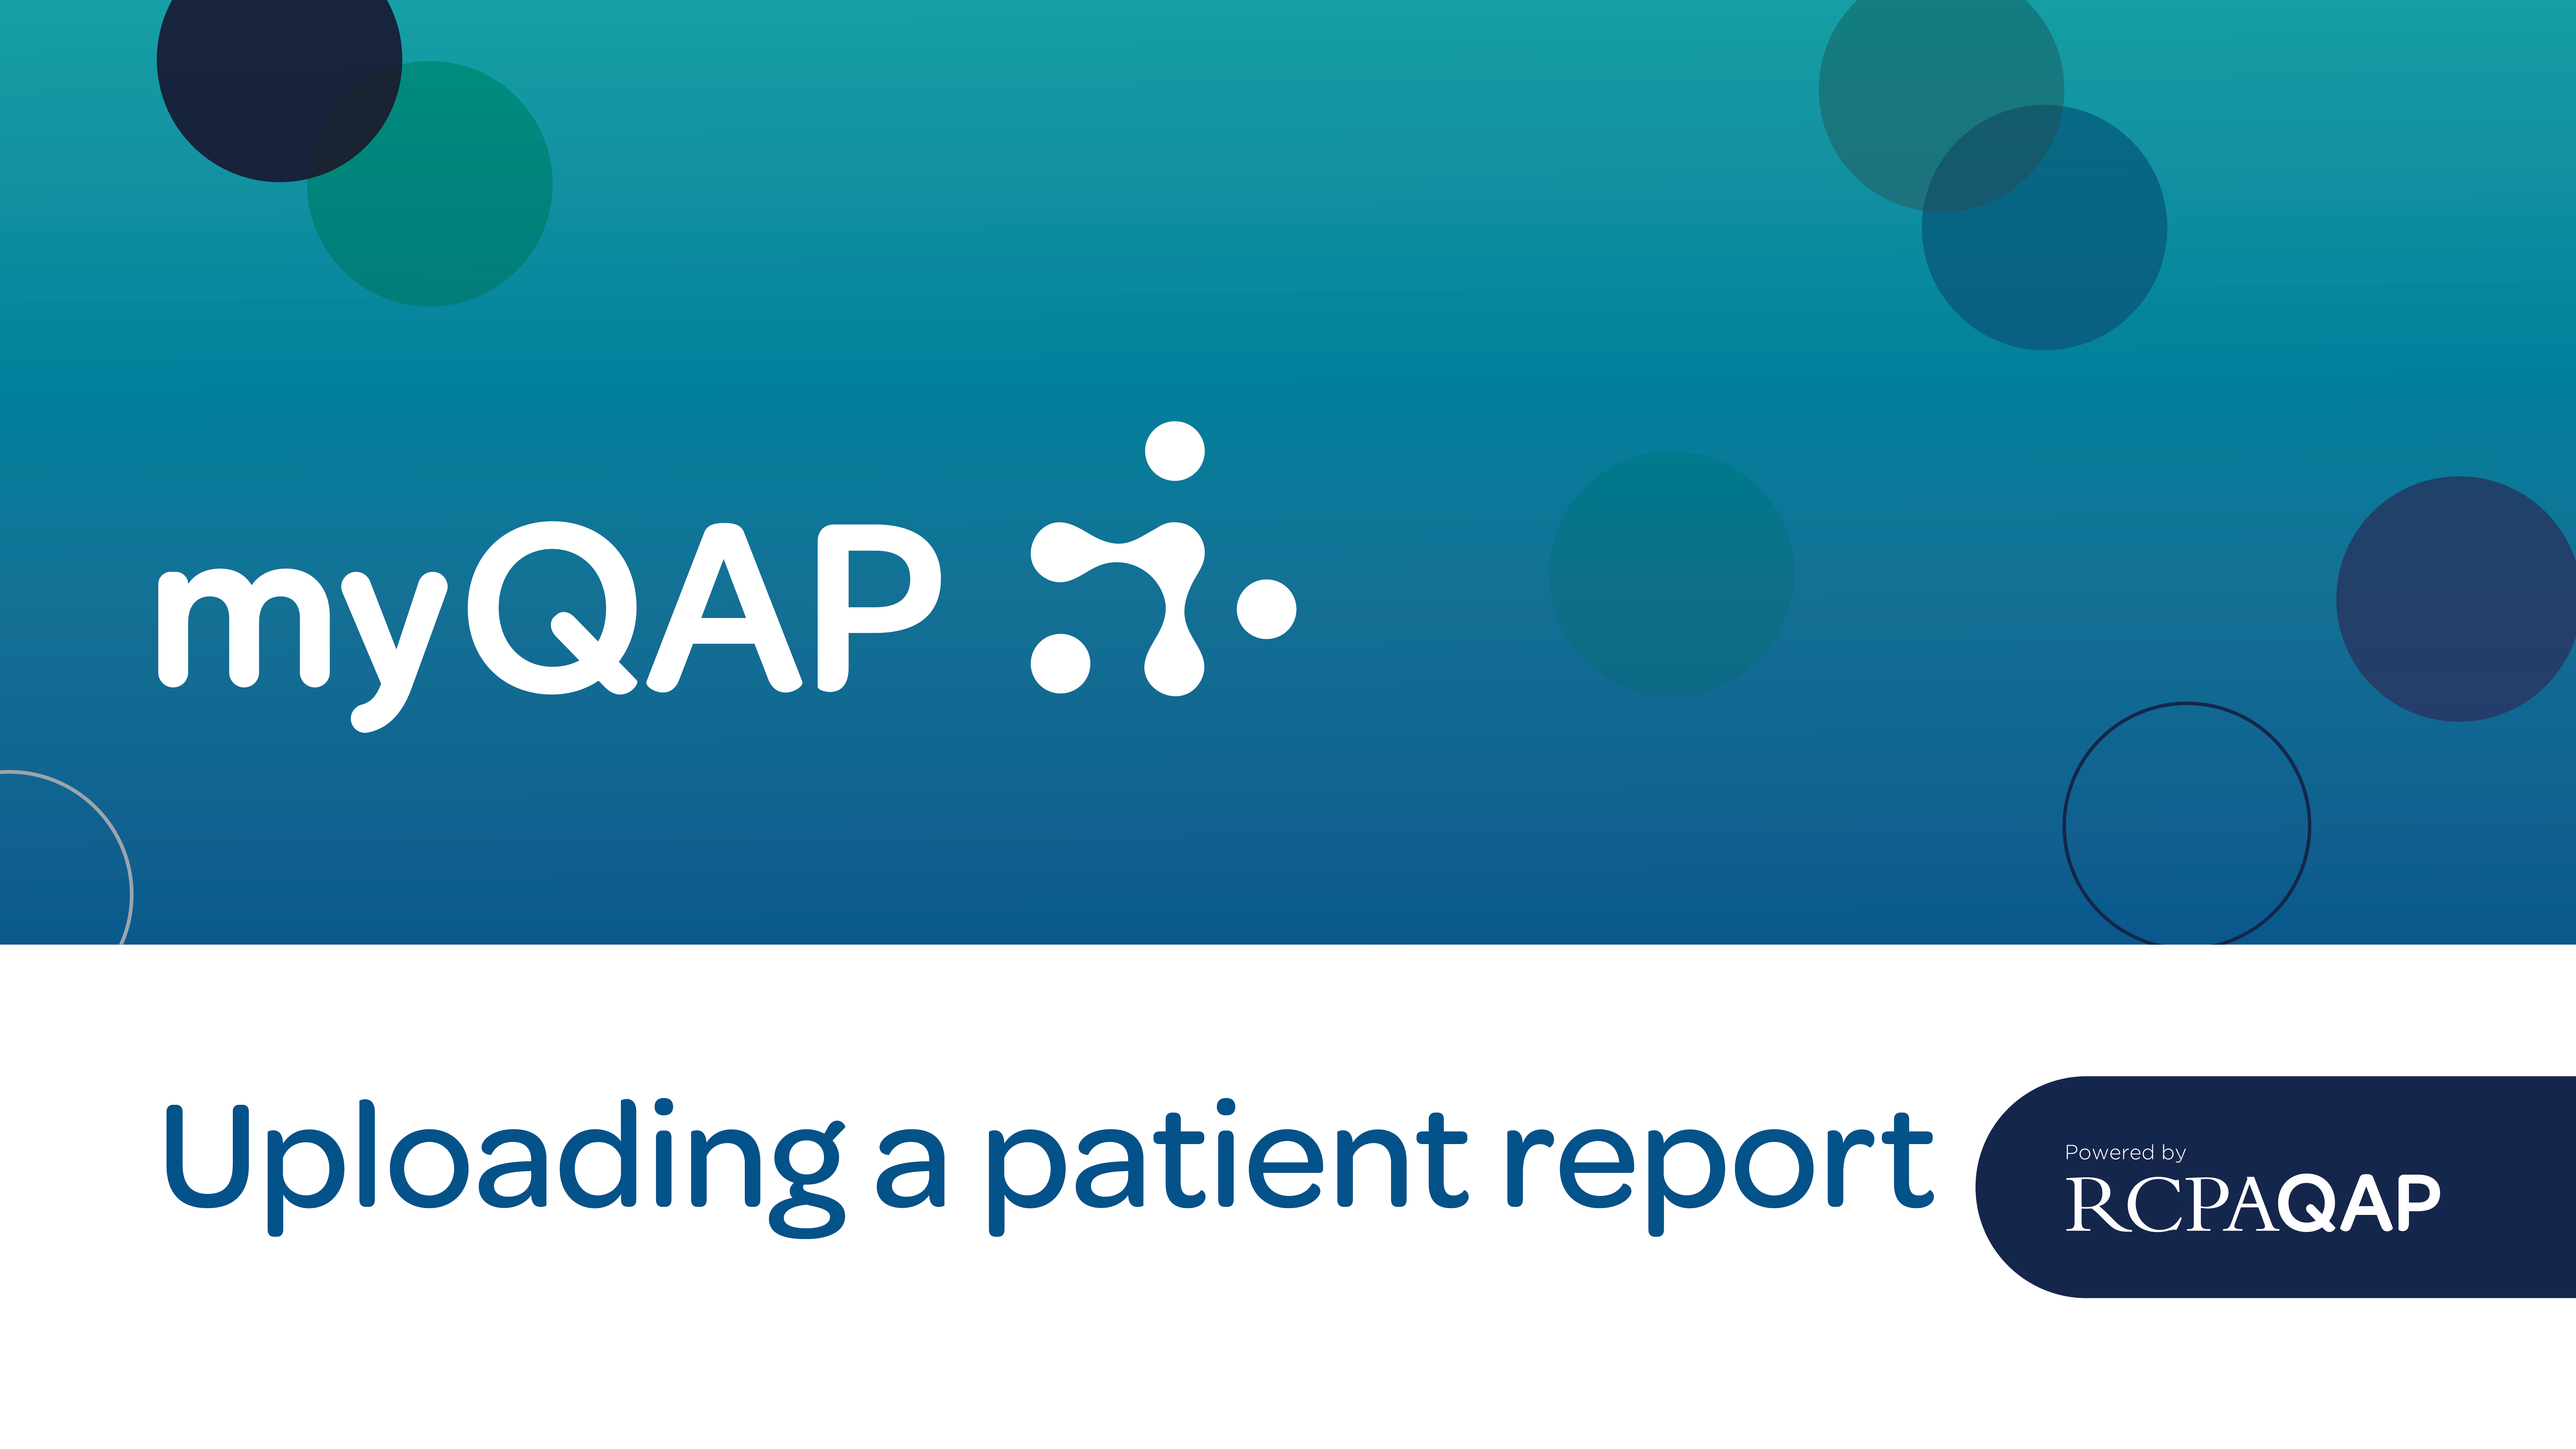 Uploading a patient report